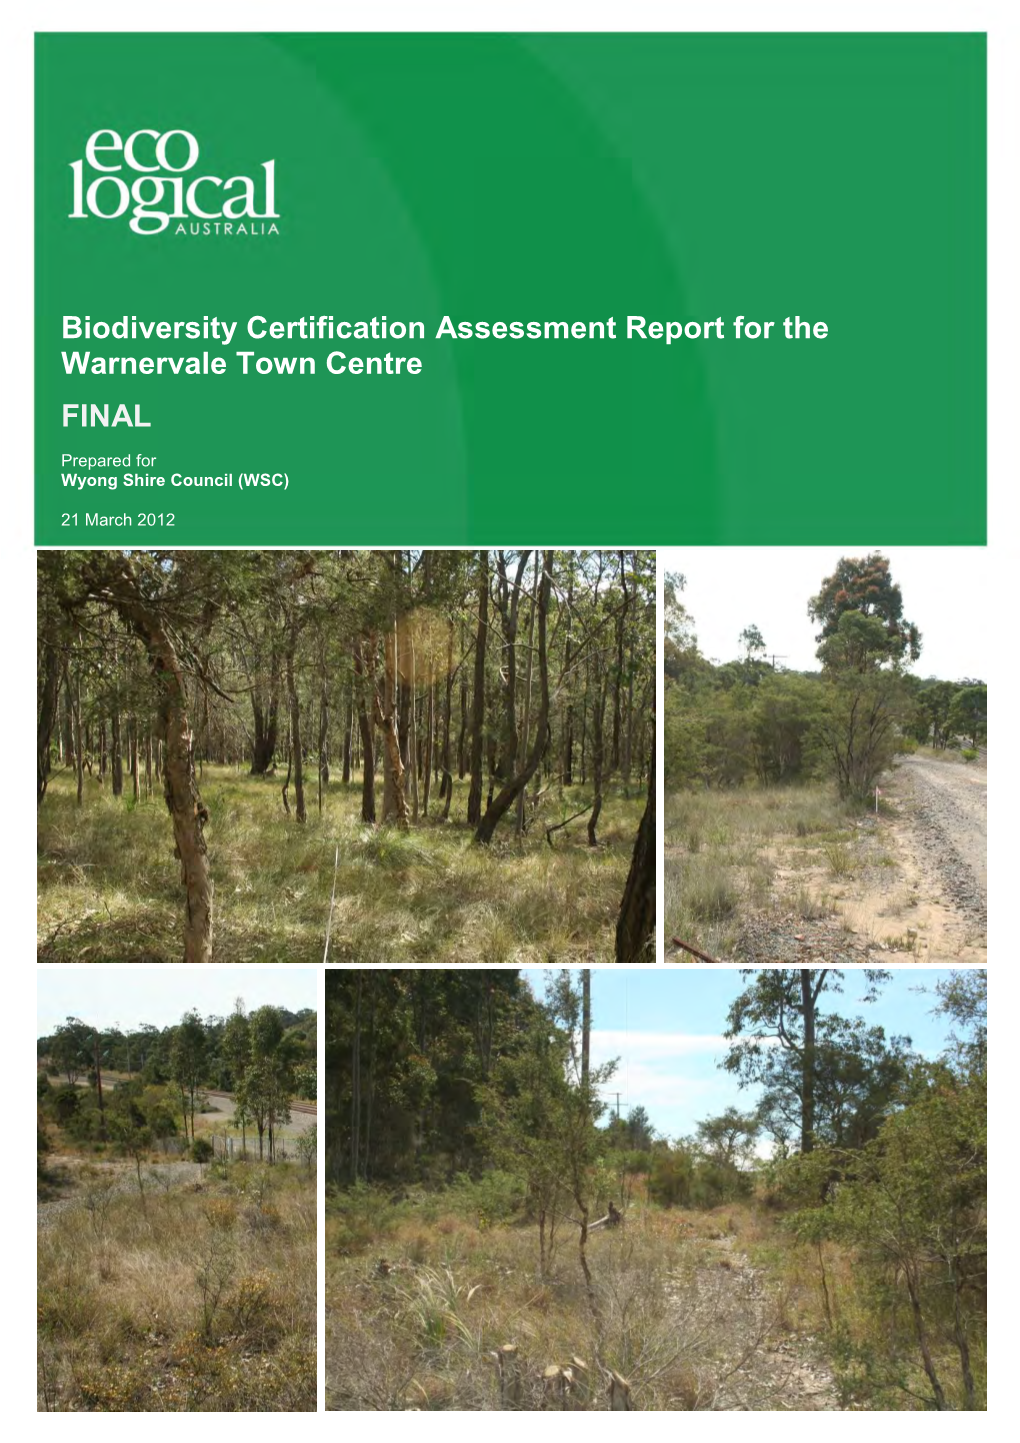 Biodiversity Certification Assessment Report for the Warnervale Town Centre